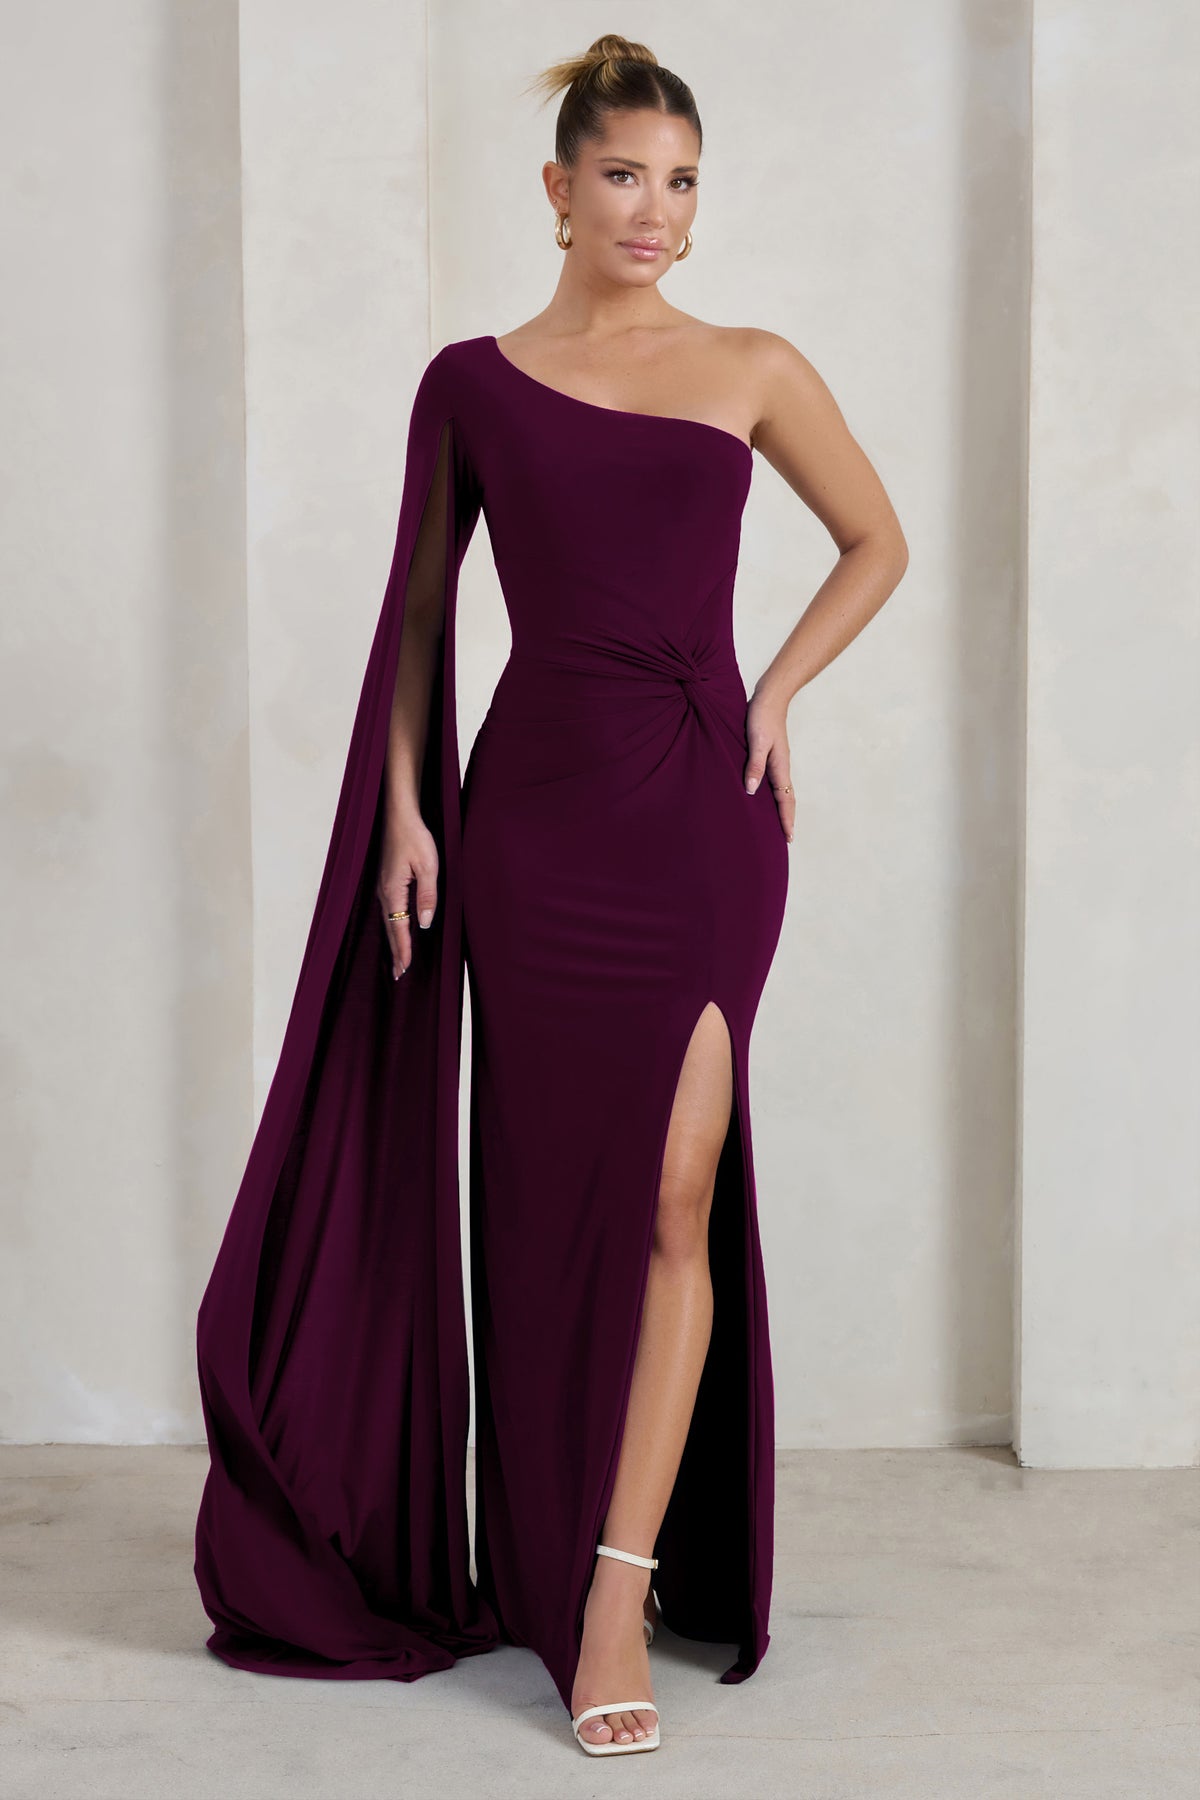 Party Time Formals 2013 Purple One Shoulder Stretch jersey Beaded Prom Gown  6023 | Promgirl.net